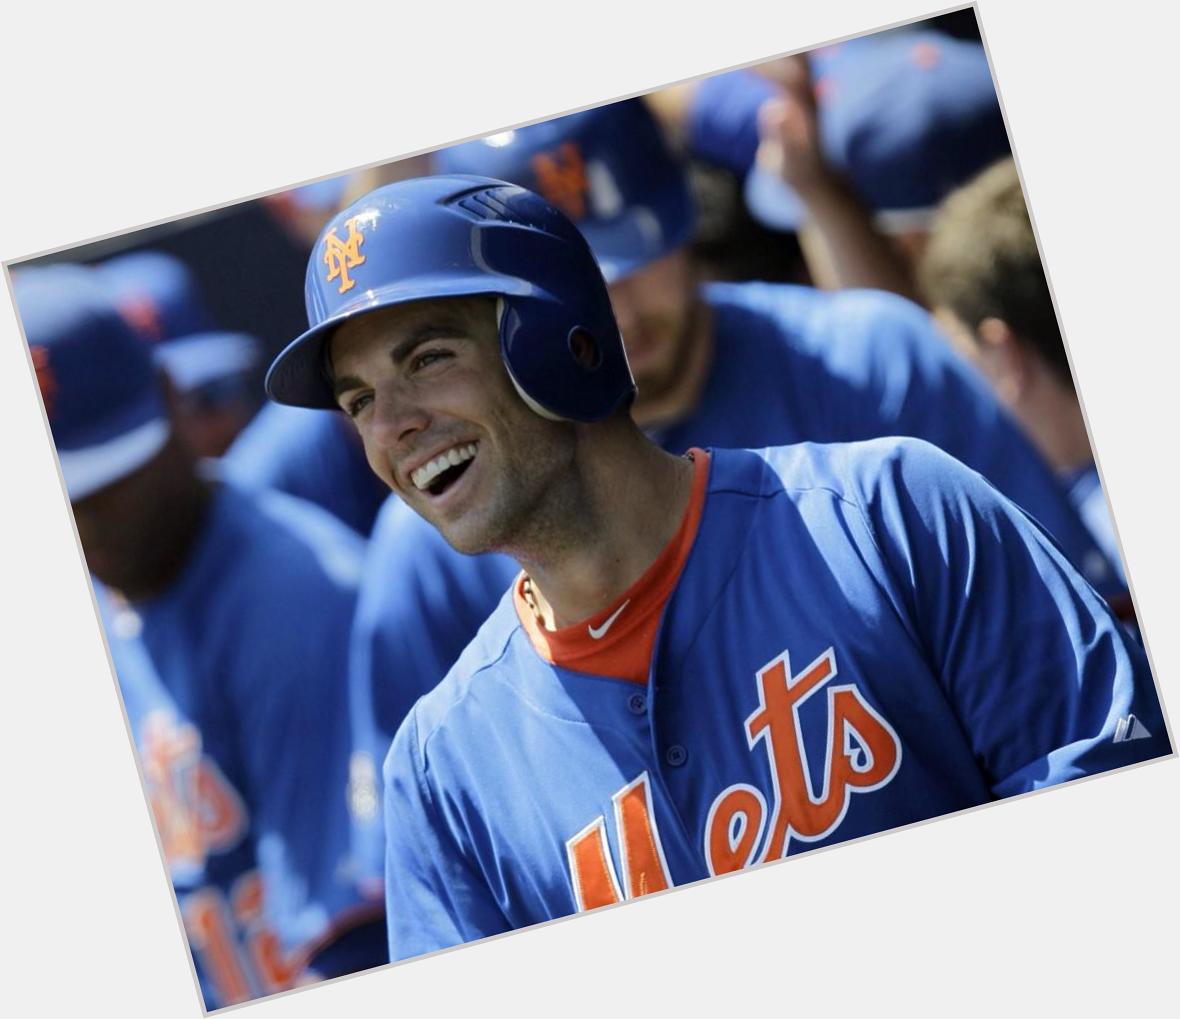 Wishing Happy 32nd Birthday to The Captain - David Wright! The success of the will largely be on his shoulders. 